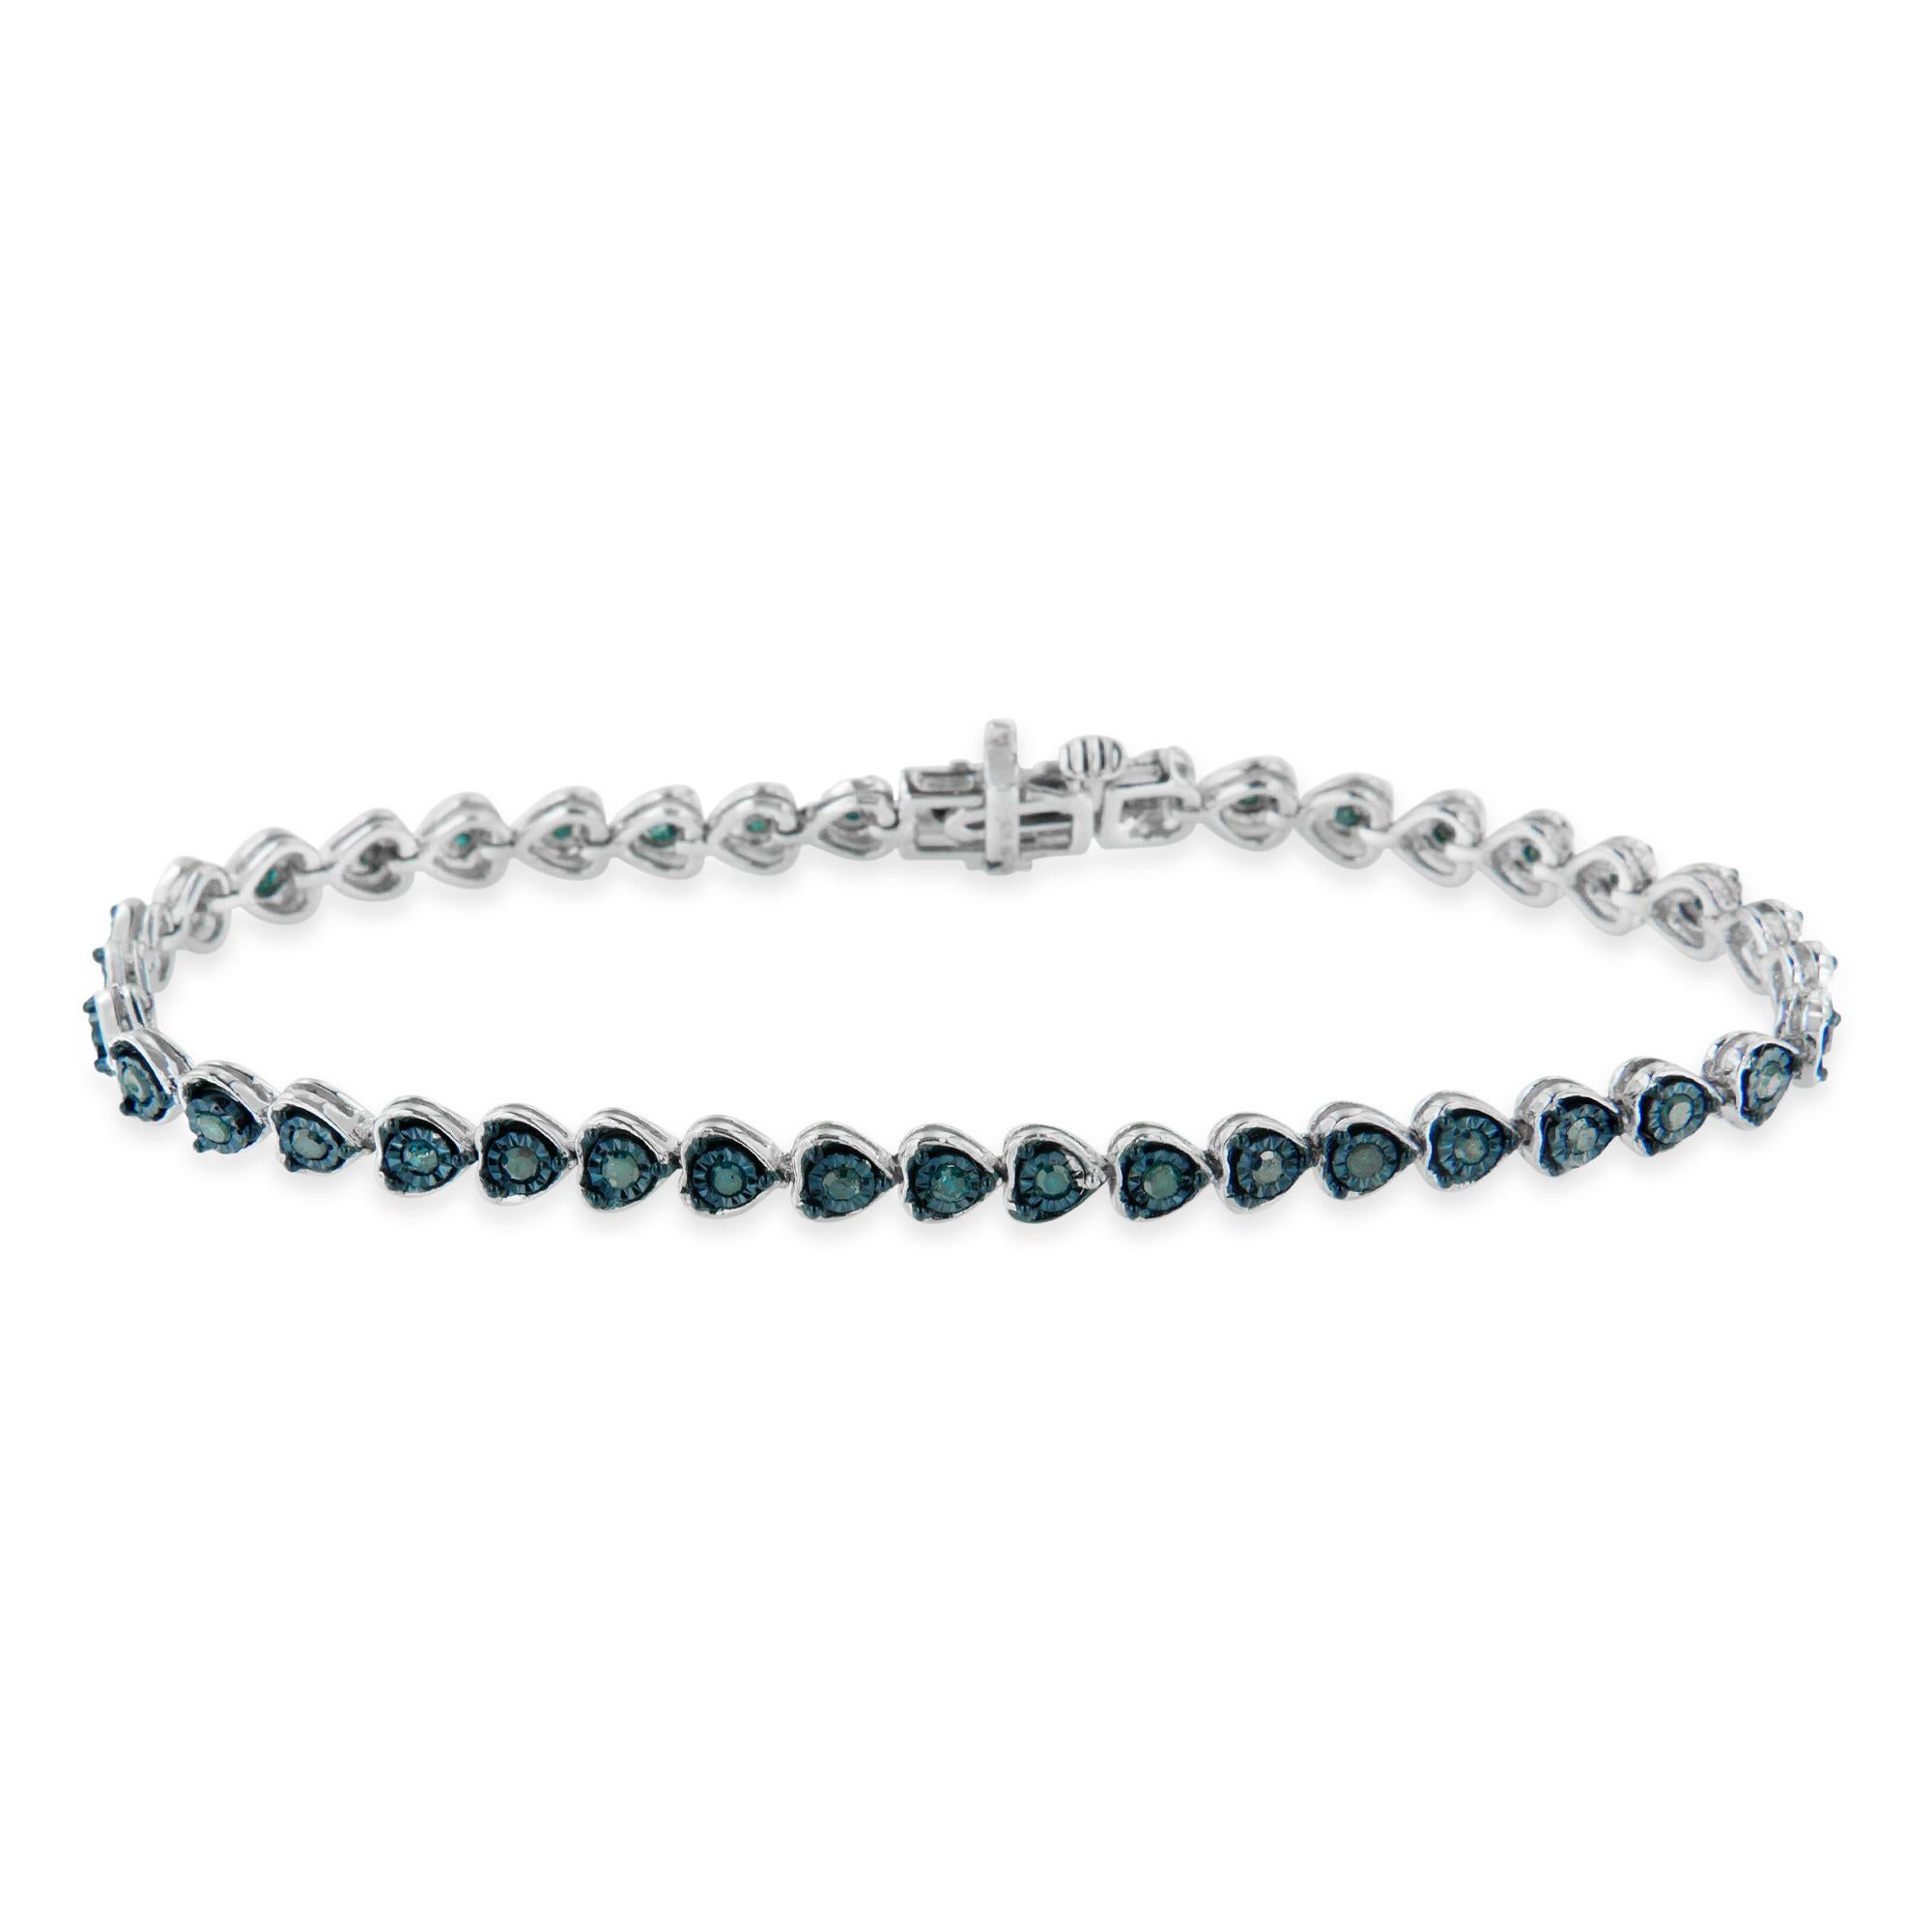 This gorgeous .925 sterling silver tennis bracelet features 1.0 carat total weight with 40 round, rose cut diamonds. The tennis bracelet has heart-shaped links with diamonds in the center of each link. The unique miracle-plate setting centers each